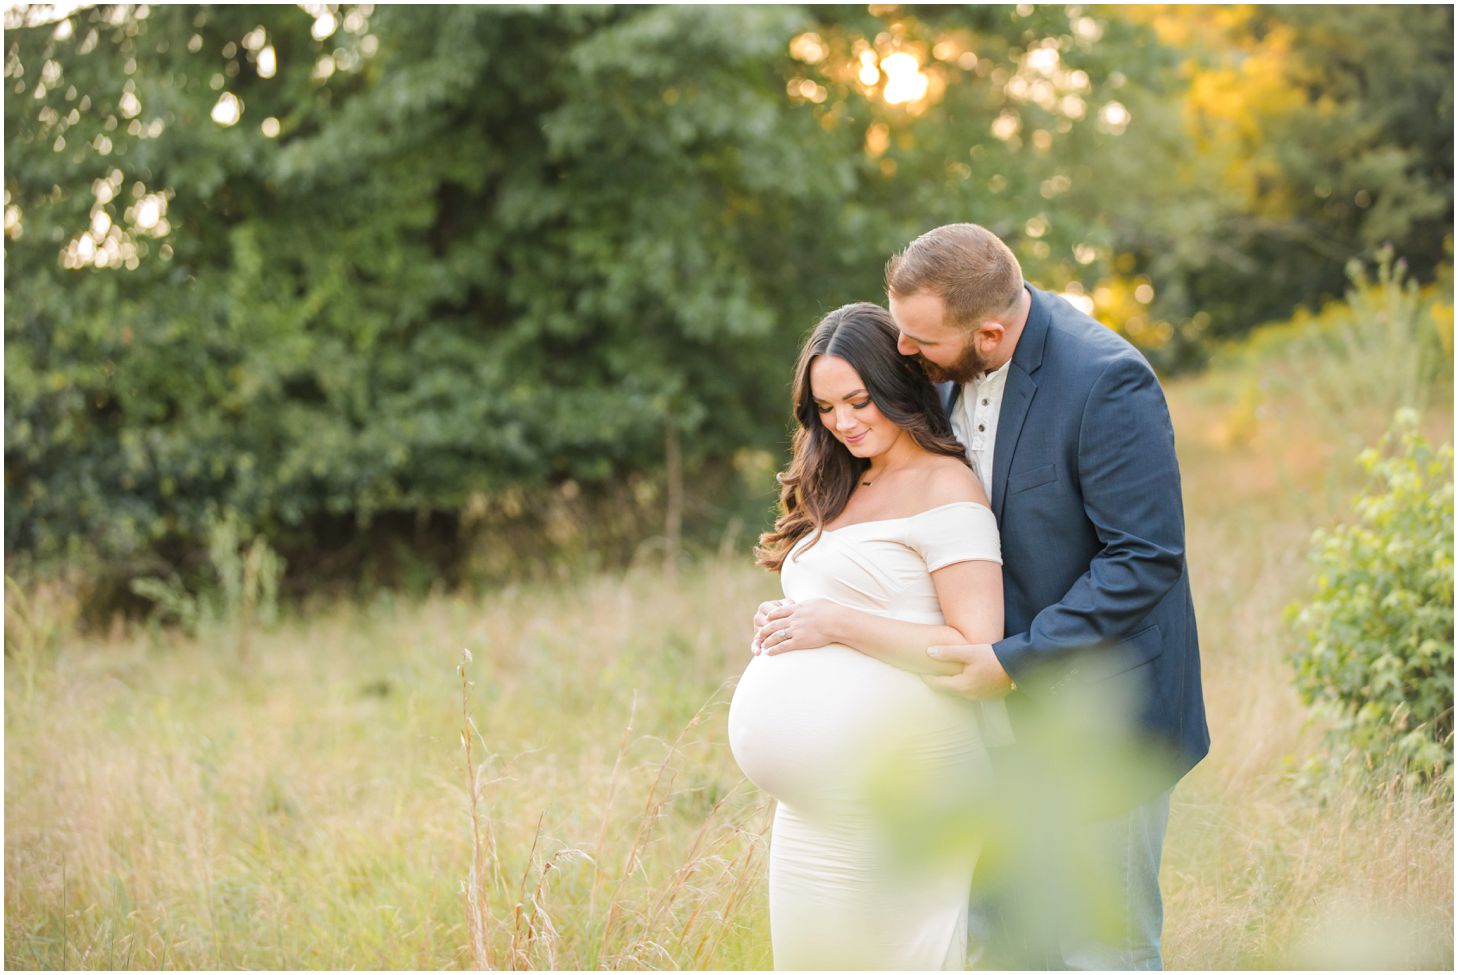 Couple in grassy field for maternity photos at North Park in Pittsburgh